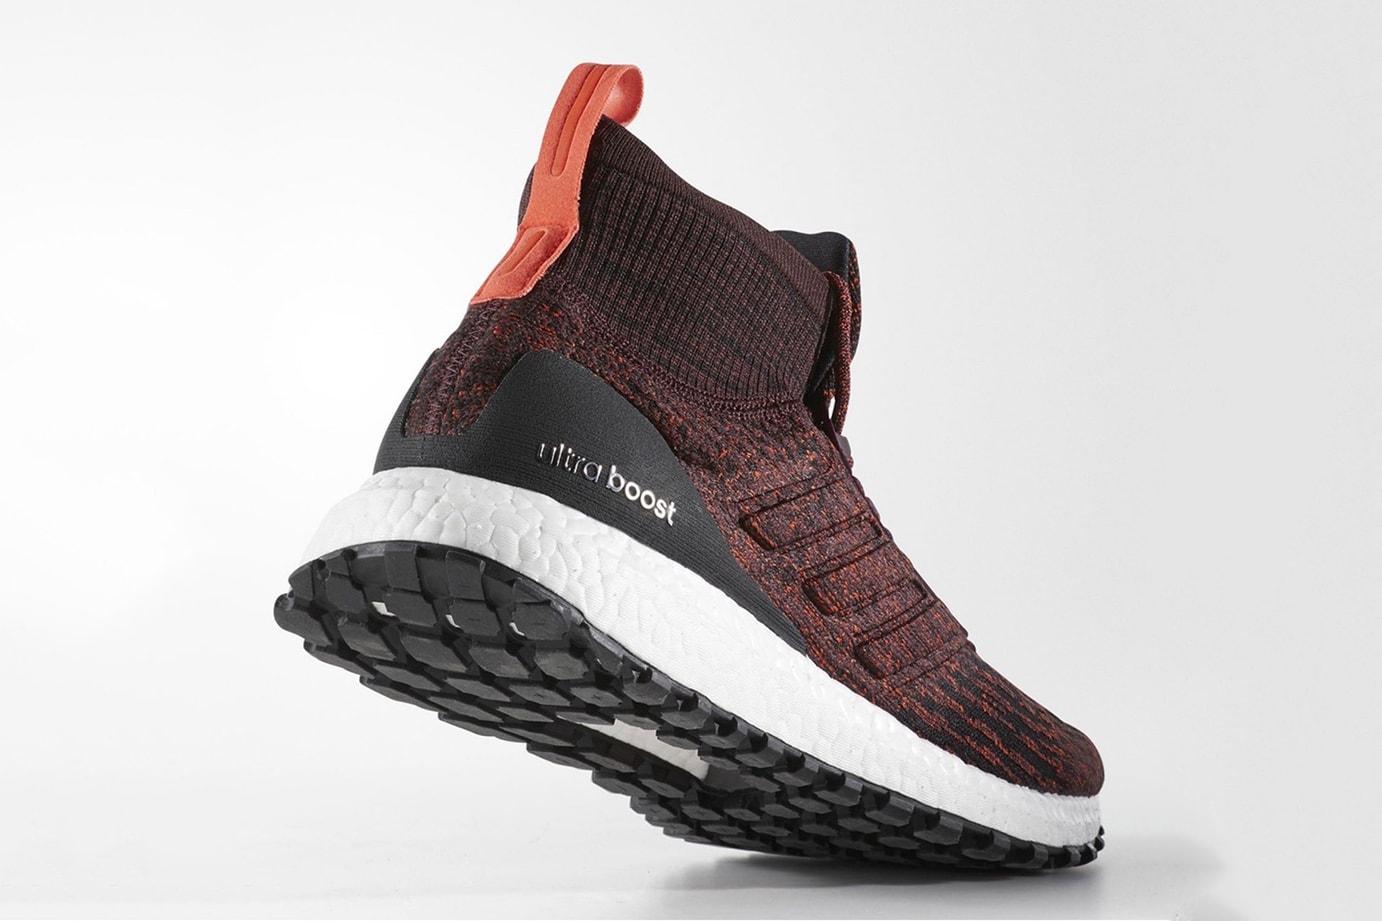 adidas UltraBOOST ATR Mid "Heather Burgundy" Official Images